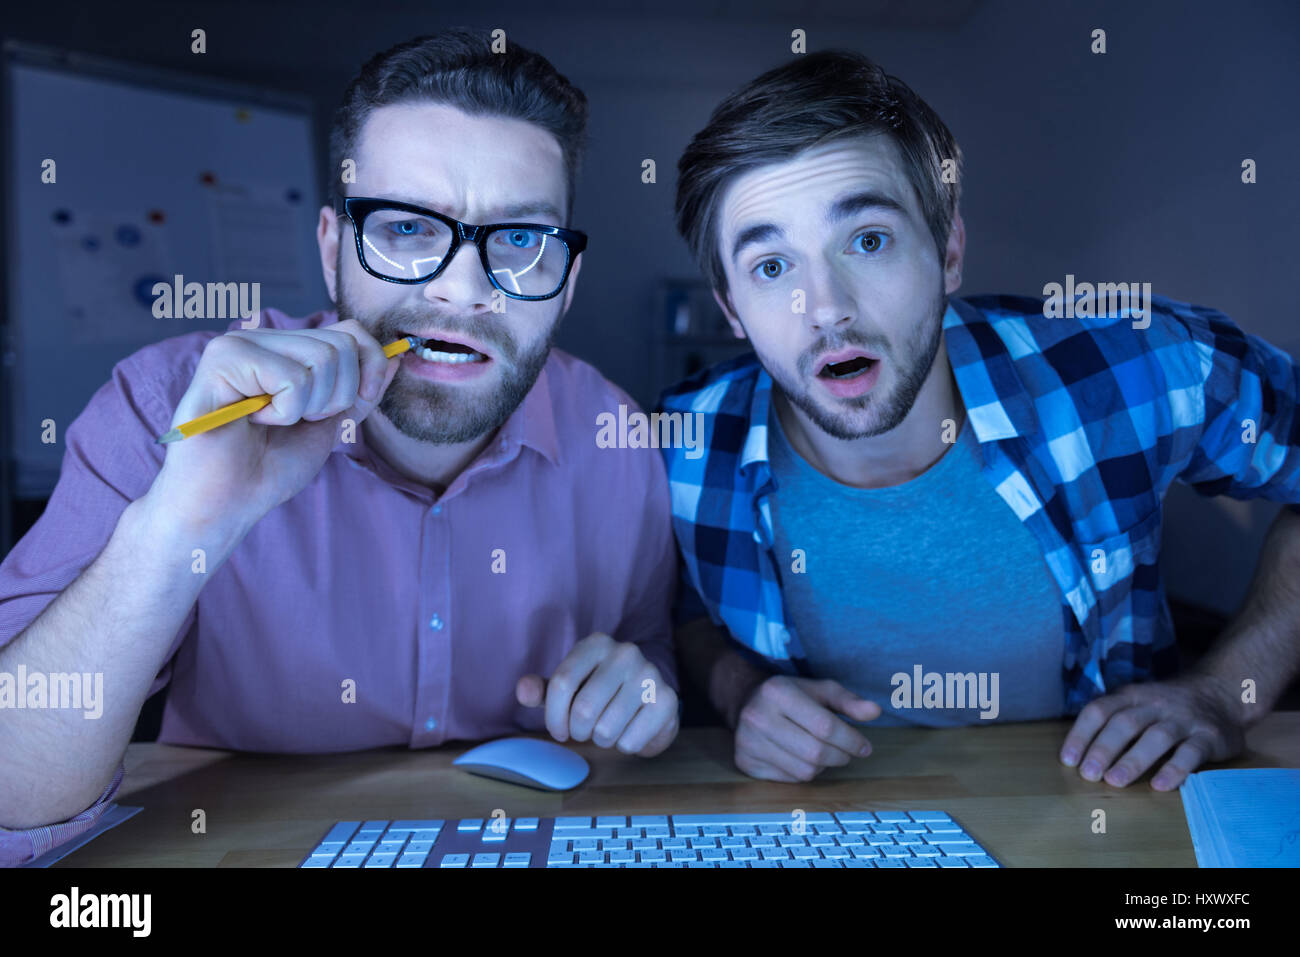 Smart nervous hackers working together Stock Photo